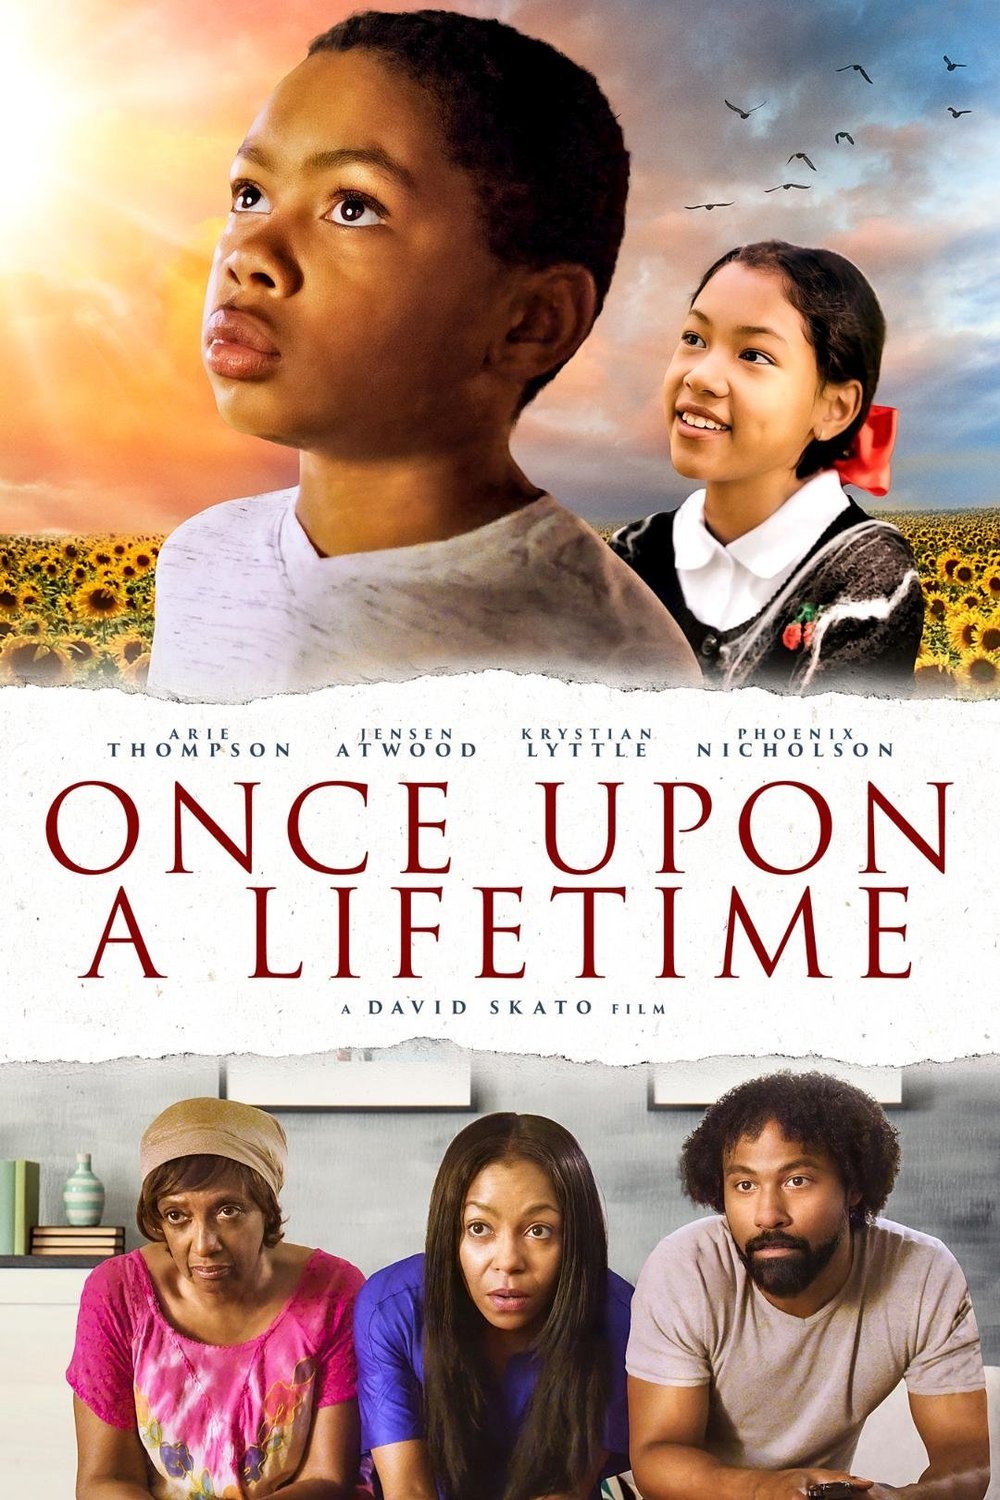 Poster of the movie Once Upon a Lifetime